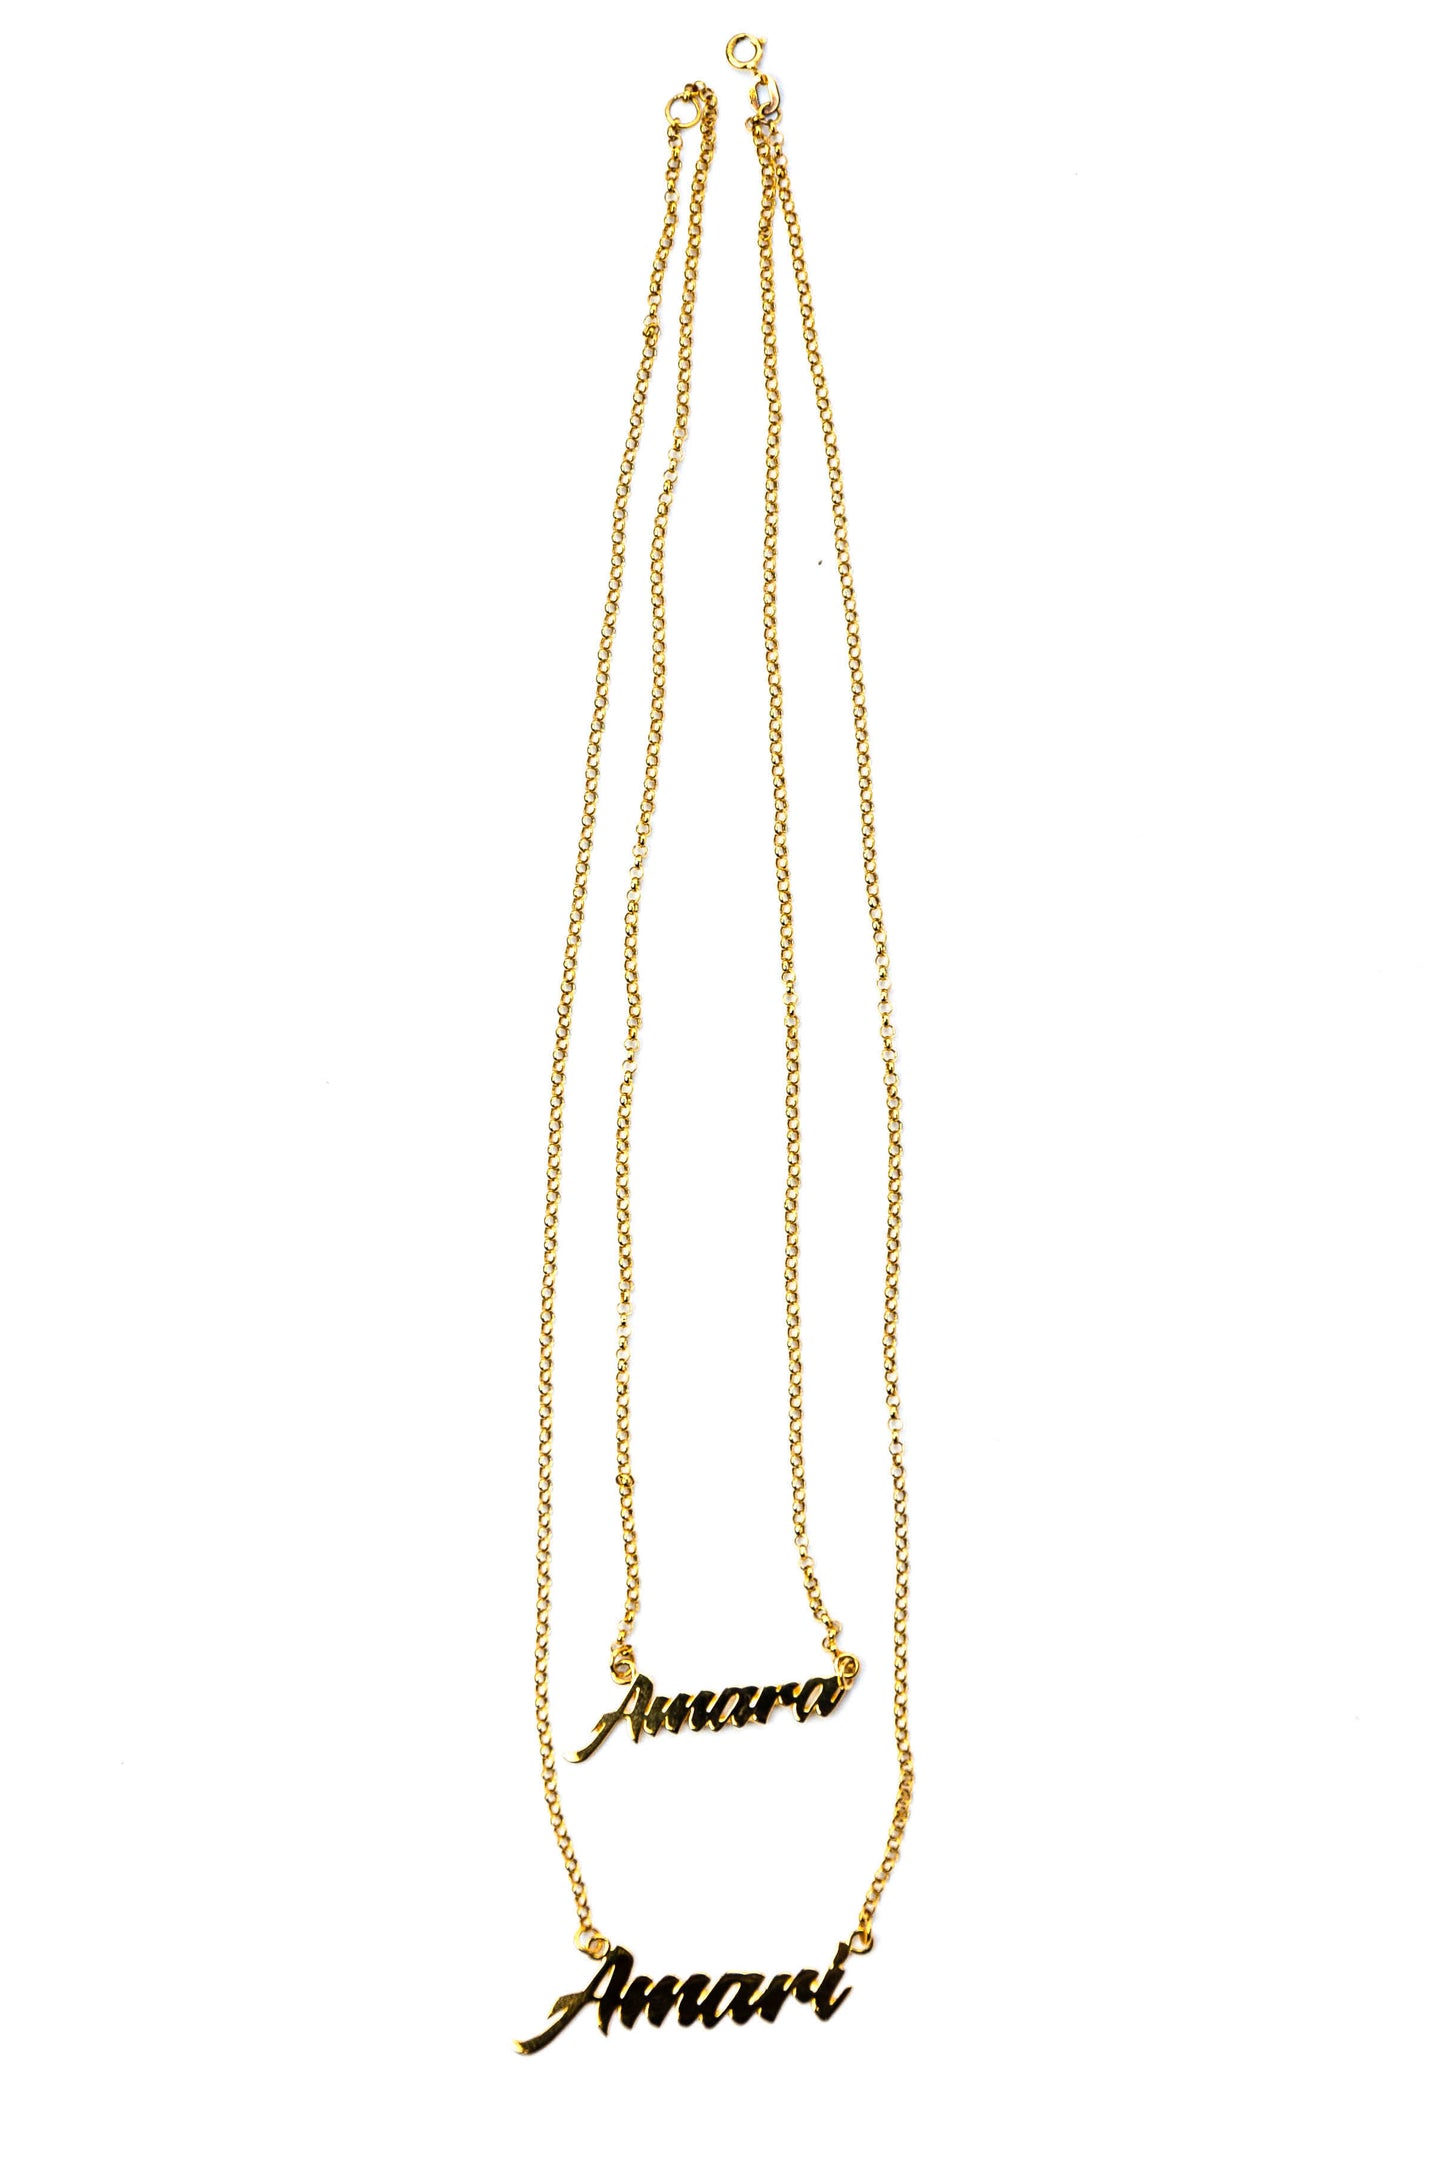 Nameplate Layered Necklace